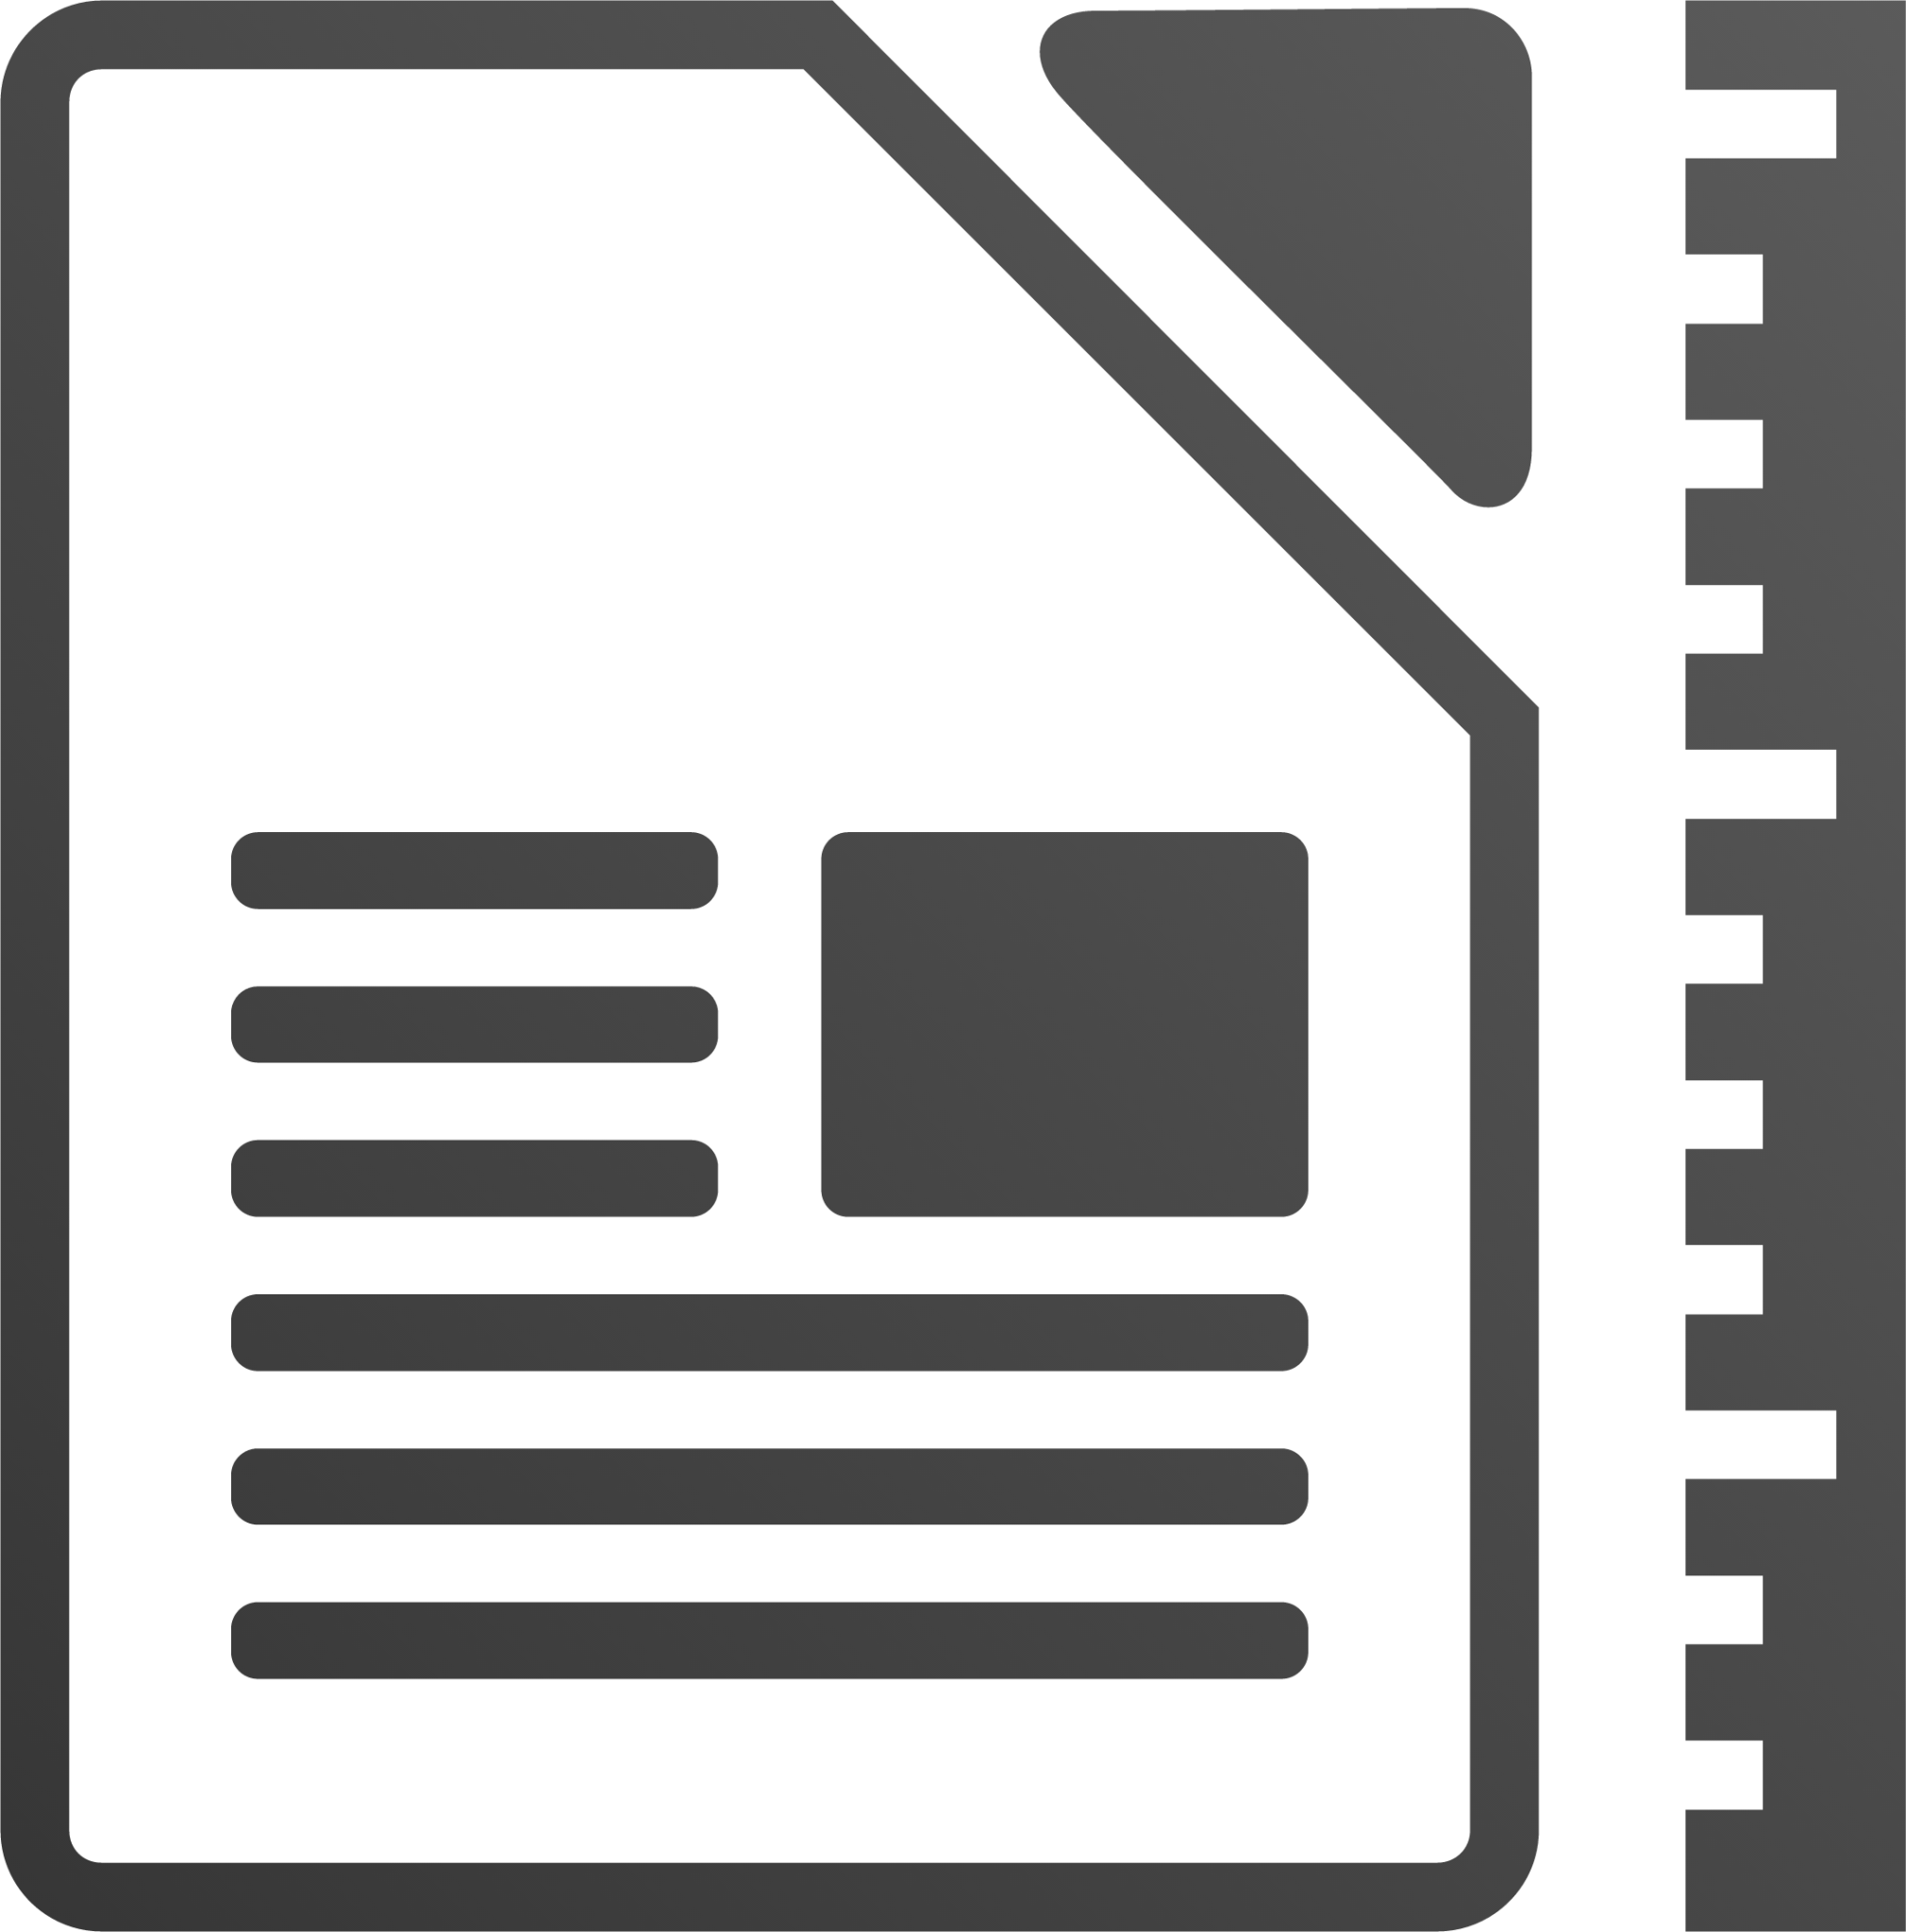 libreoffice text template icon